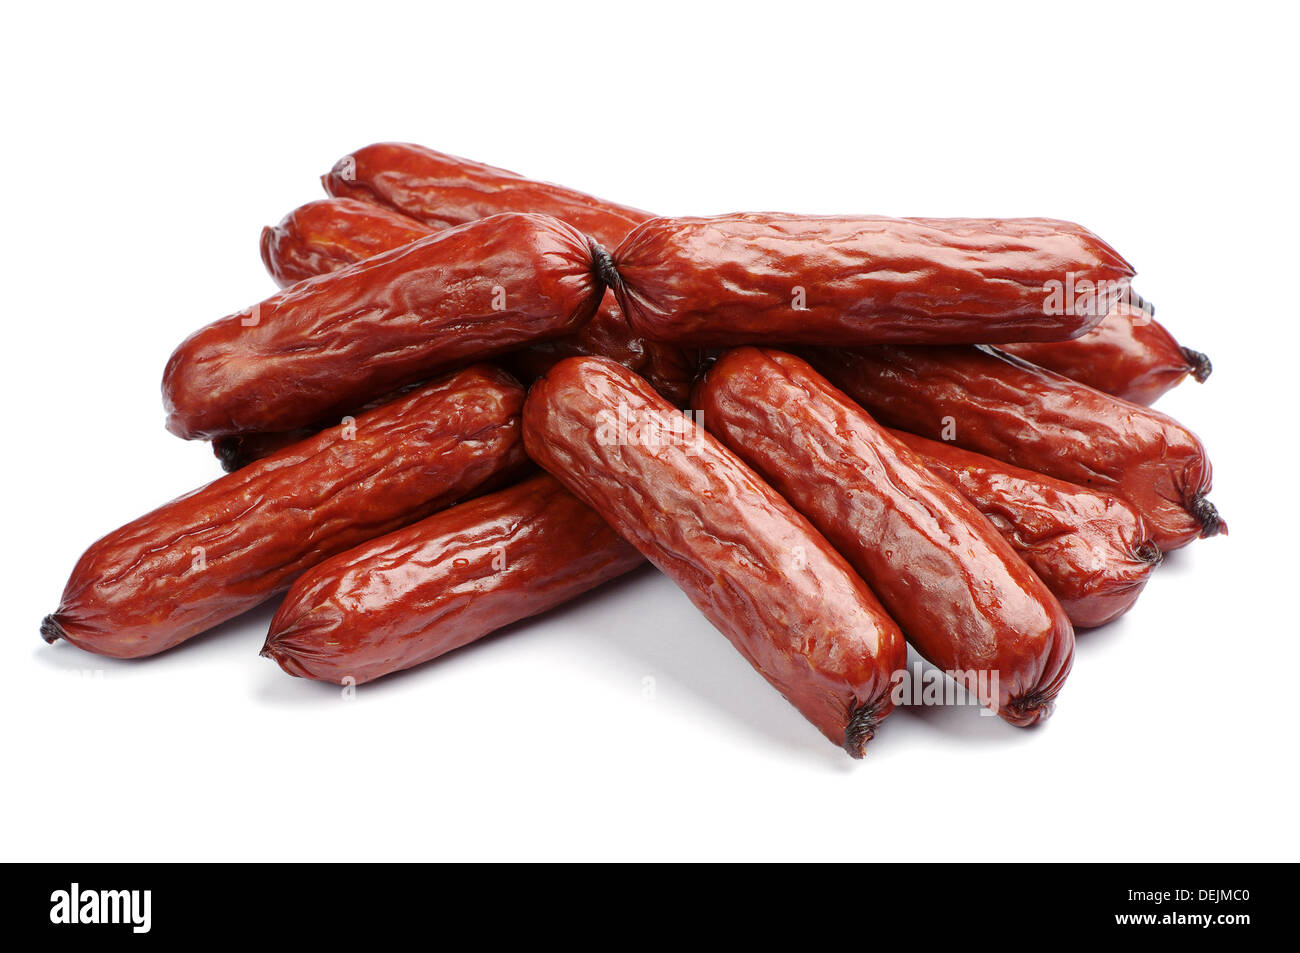 Small smoked sausages on a white background Stock Photo